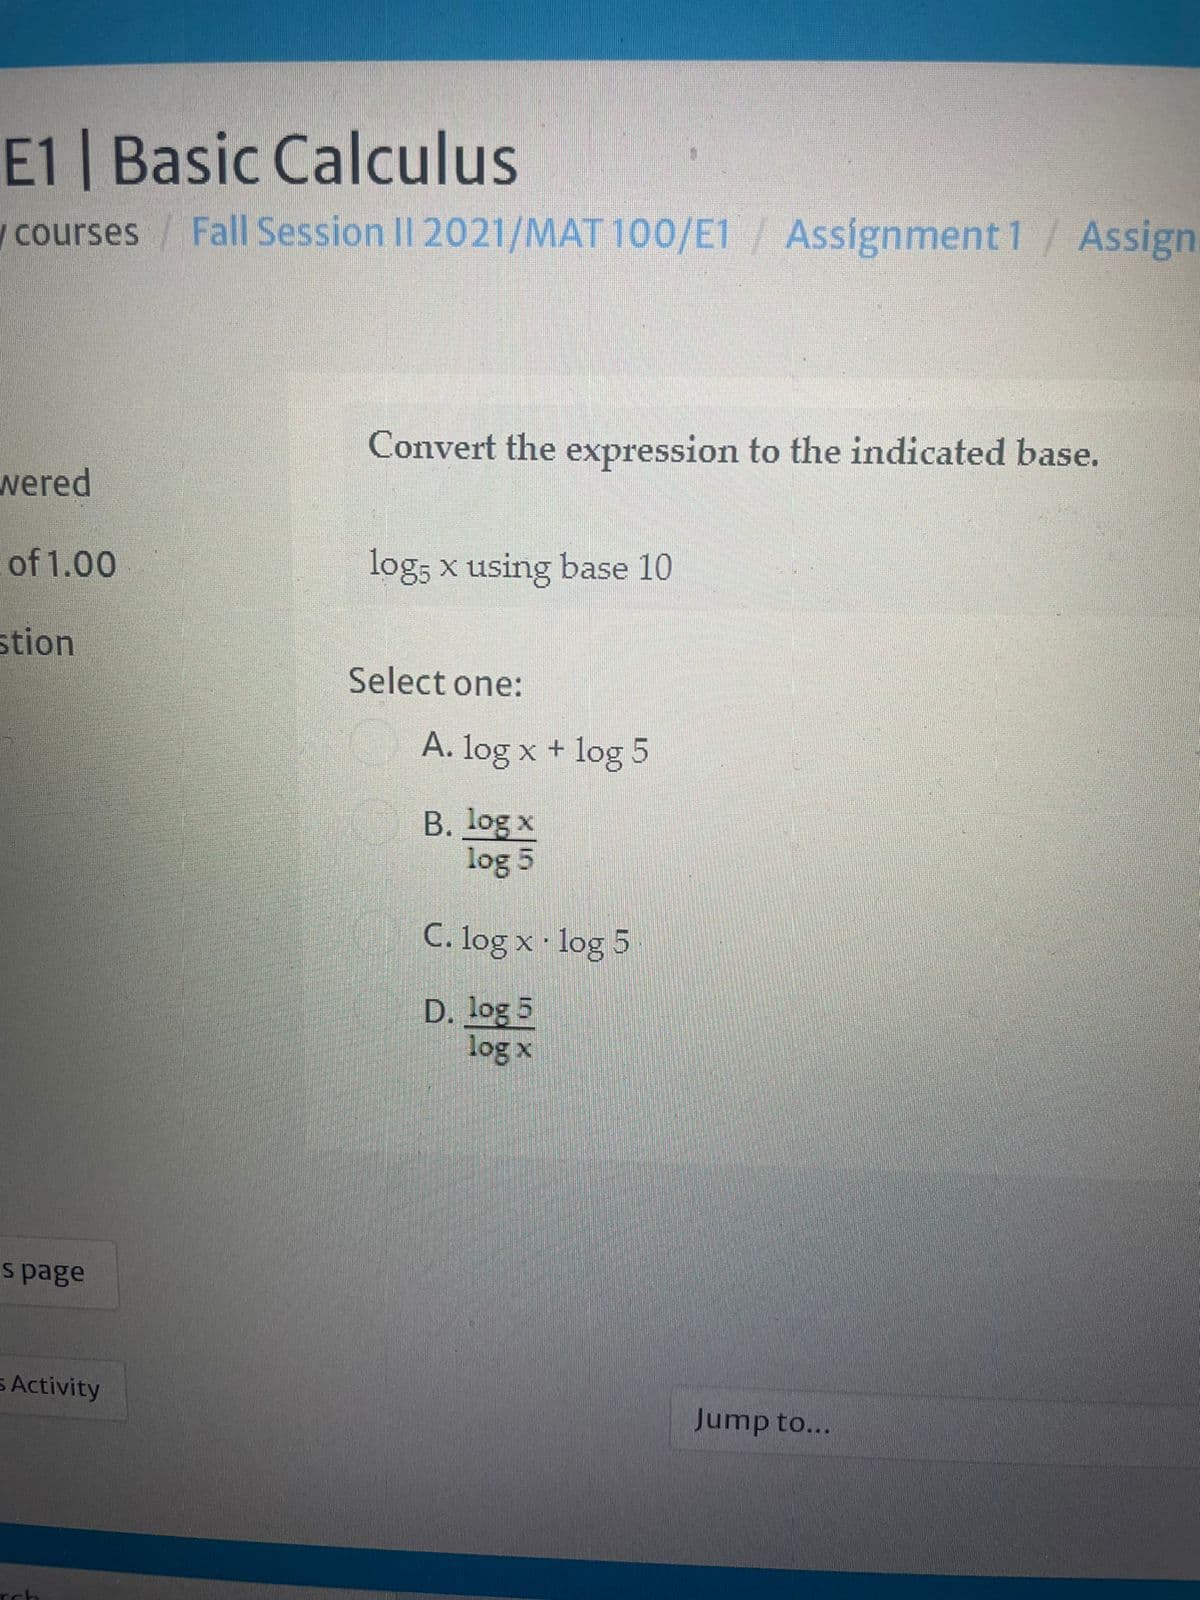 E1 | Basic Calculus
wcourses Fall Session II 2021/MAT 100/E1/ Assignment 1/Assign
Convert the expression to the indicated base.
wered
of 1.00
log, x using base 10
stion
Select one:
A. log x + log 5
B. log x
log 5
C. log x log 5
D. log 5
log x
s page
s Activity
Jump to...
